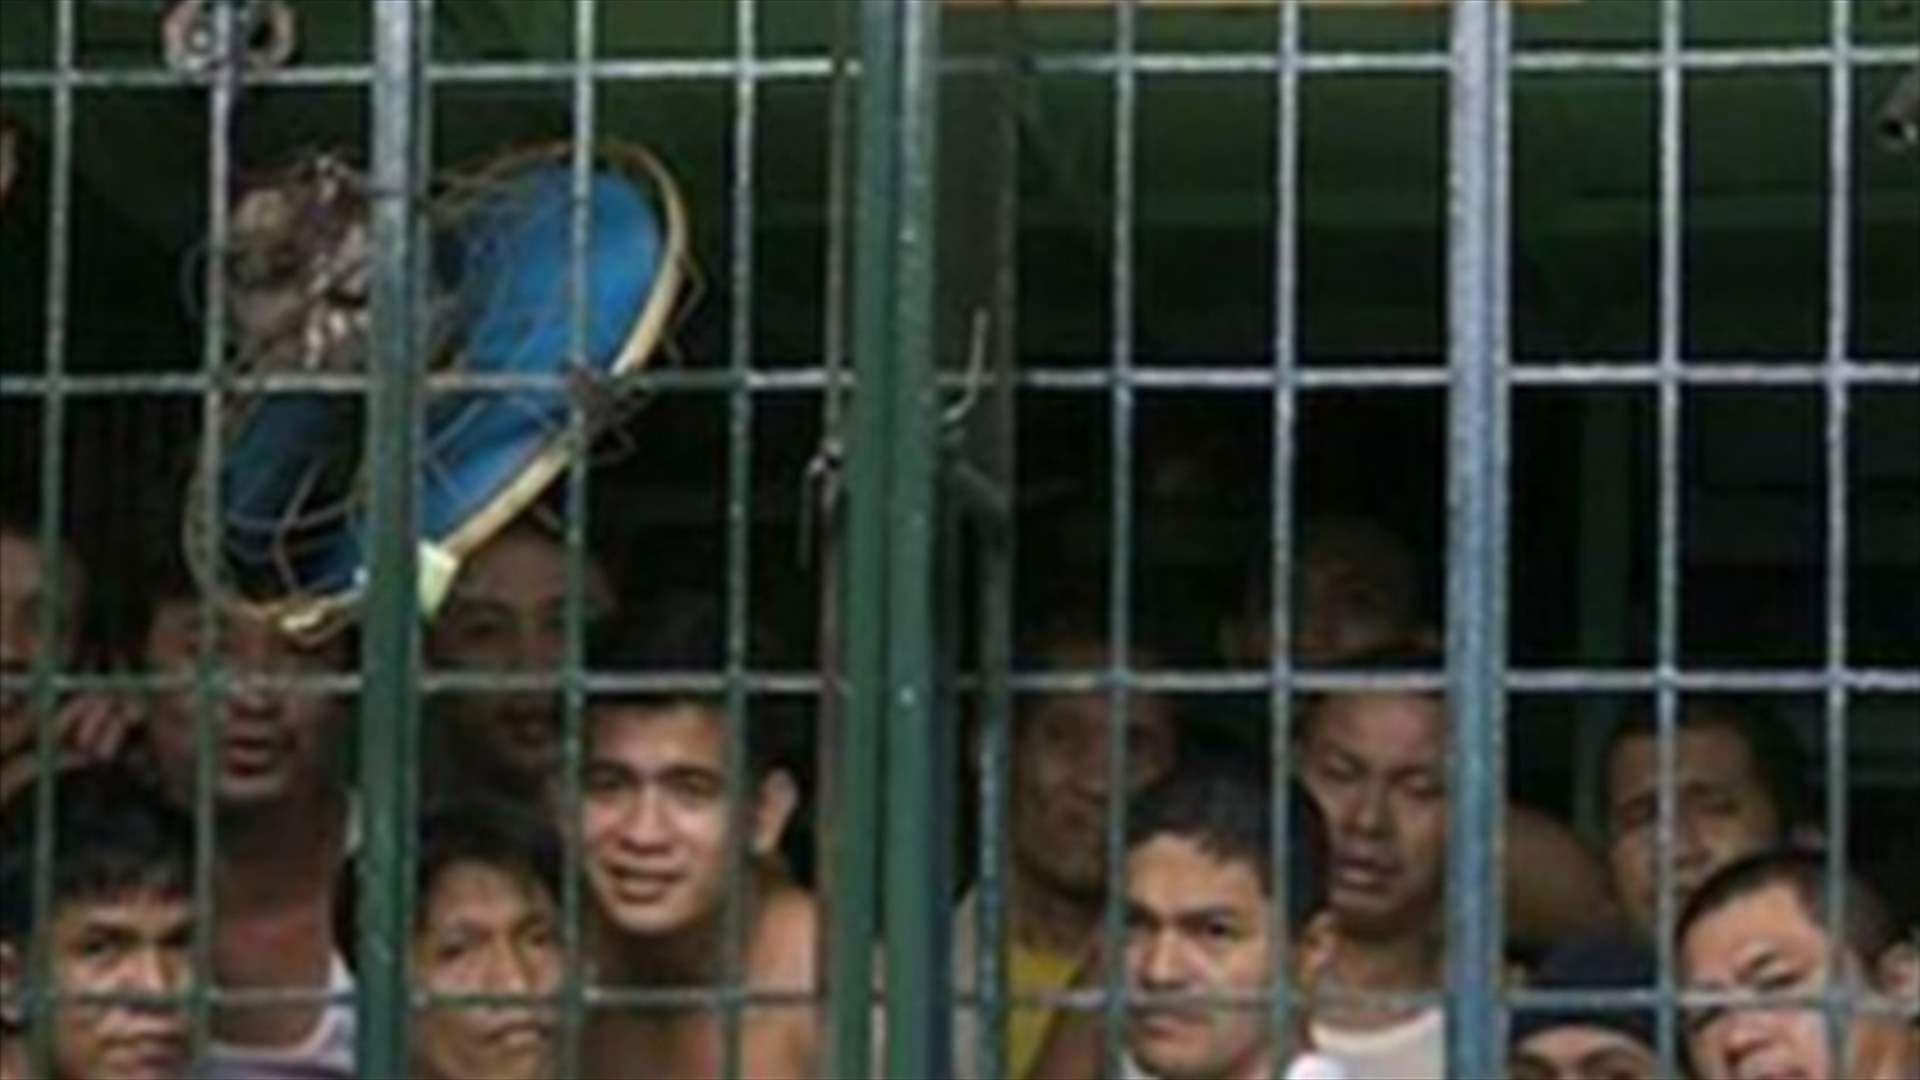 Filipino militants free 8 comrades, 15 others in jail attack